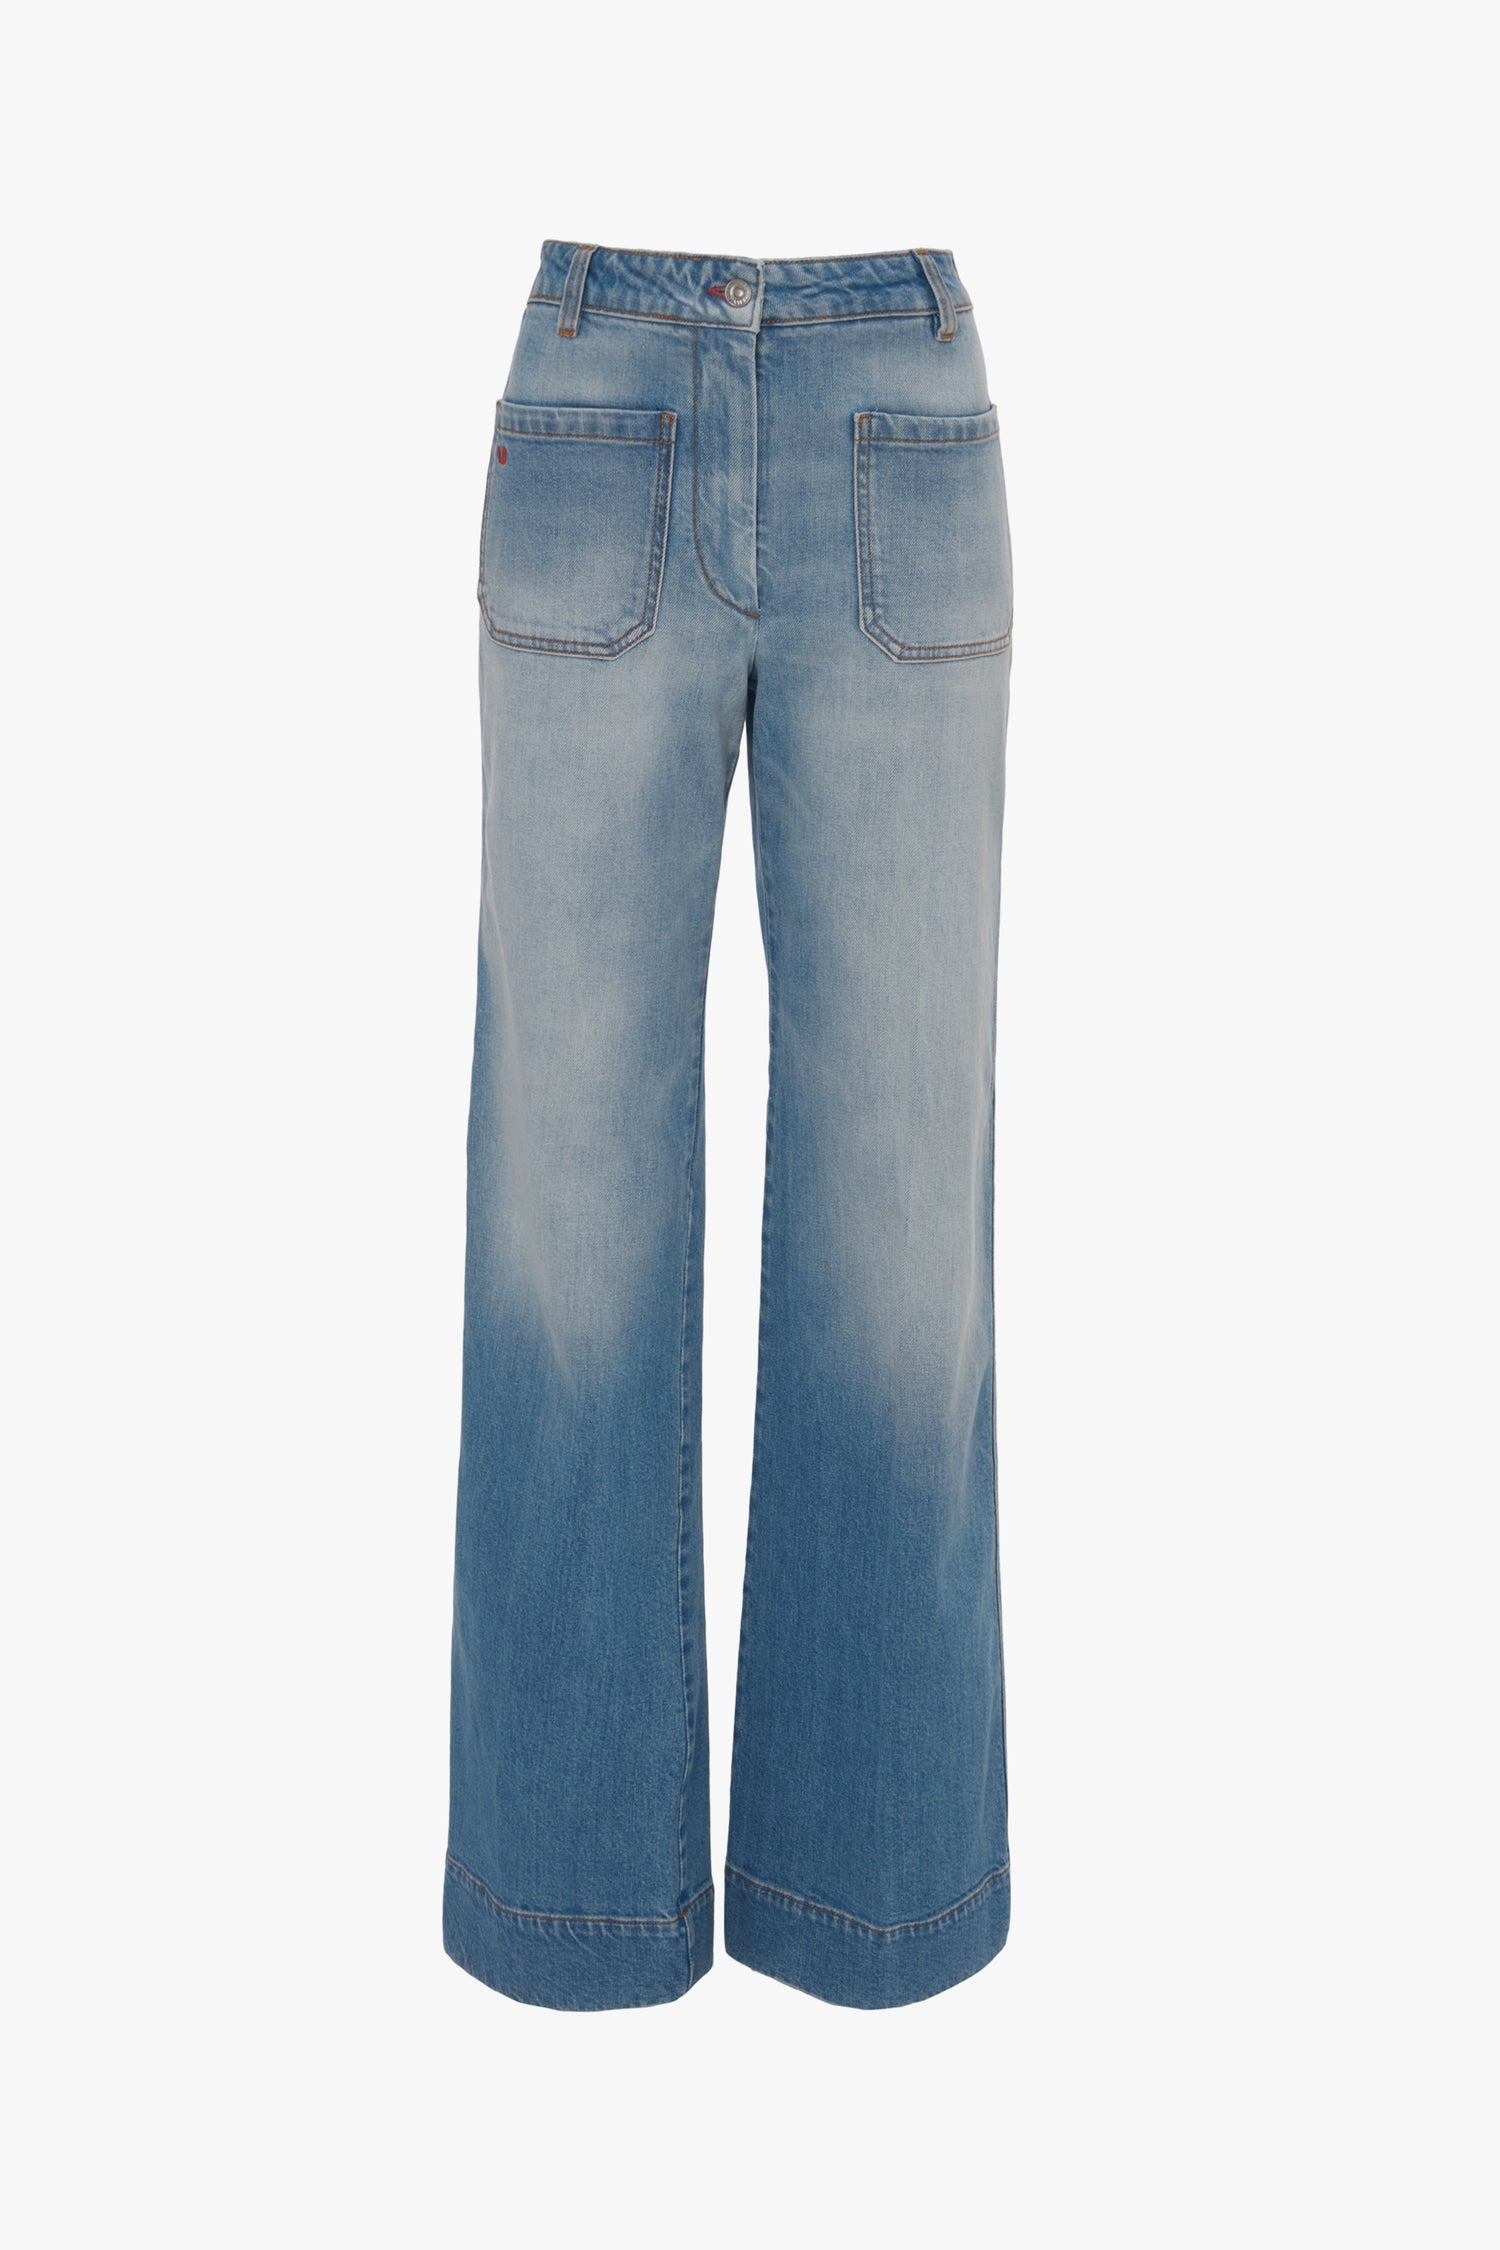 A pair of blue wide-leg jeans with front patch pockets and a high waist, crafted in vintage denim style, displayed against a white background: Alina High Waisted Jean In Light Summer Wash by Victoria Beckham.